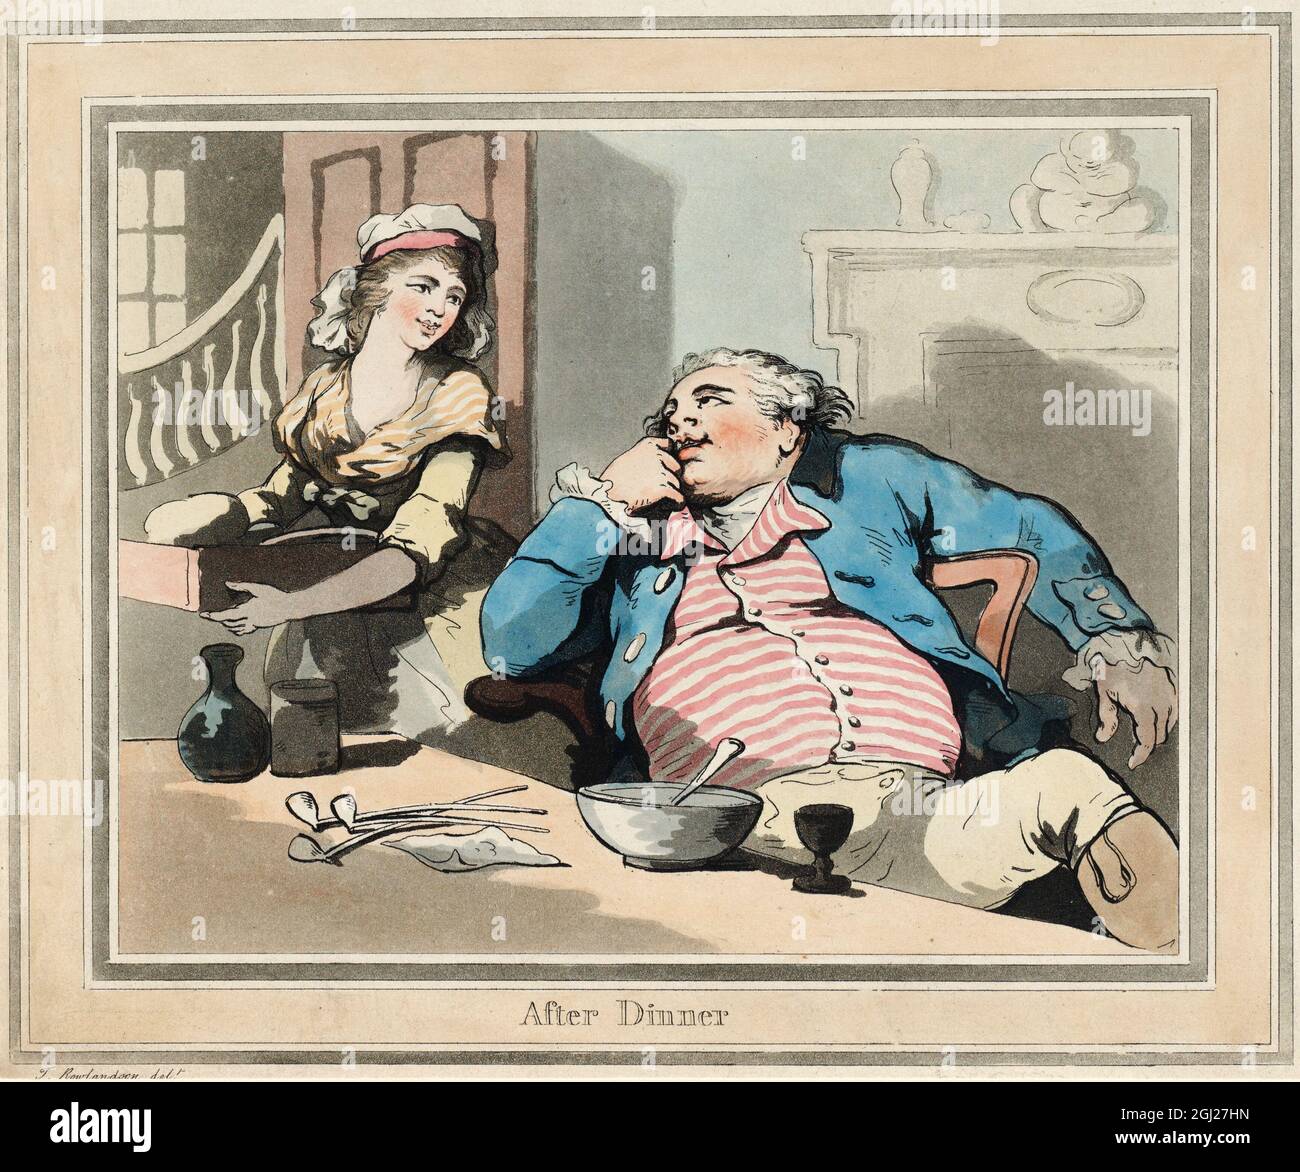 After Dinner 1790 Artist: Thomas Rowlandson (1756-1827) an English artist and caricaturist of the Georgian Era. A social observer, he was a prolific artist and print maker.  Credit: Thomas Rowlandson/Alamy Stock Photo